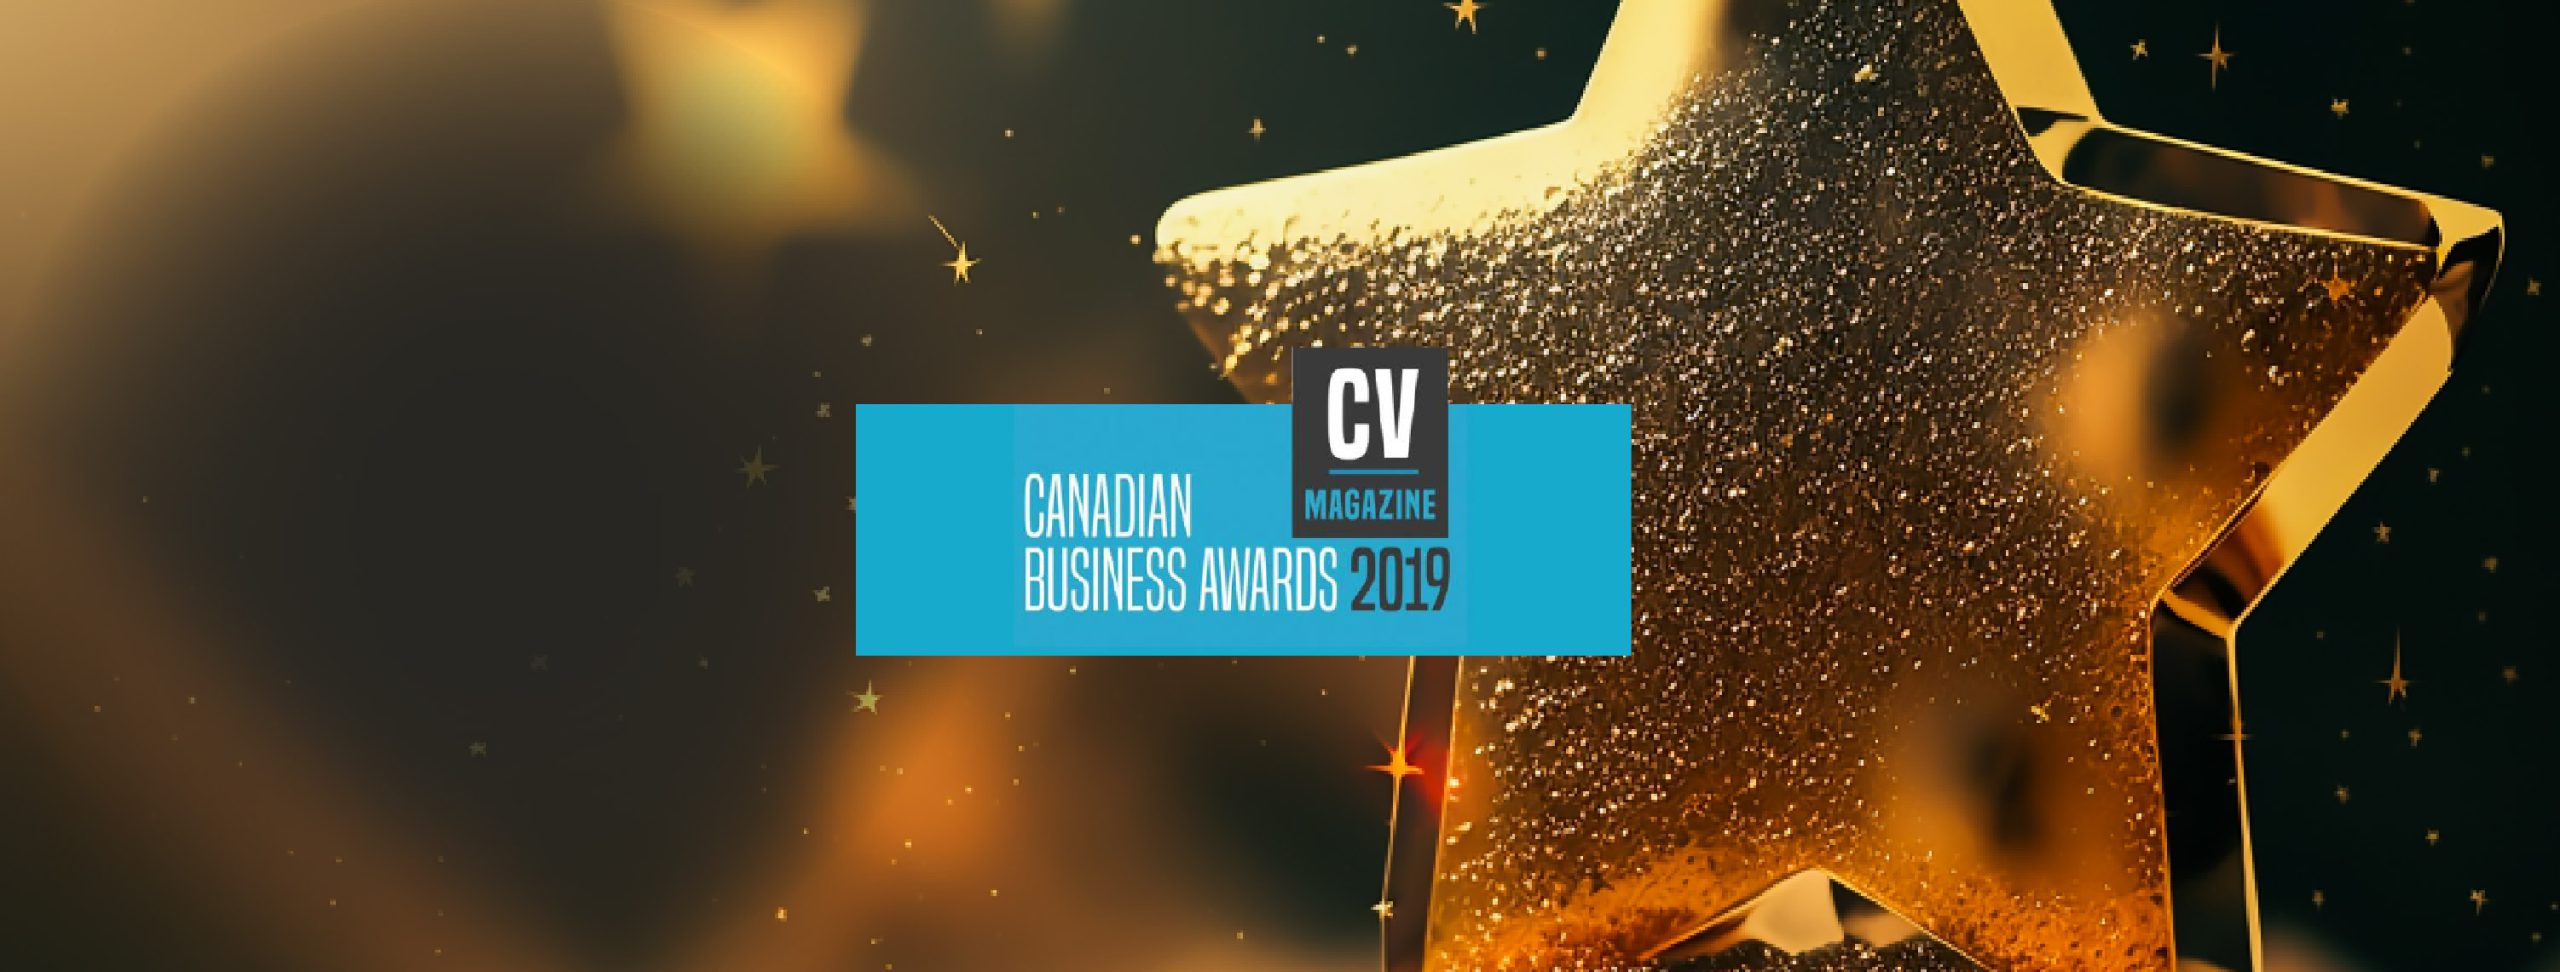 Corporate Vision Magazine Canadian Business Awards 2019 Awarded to E-Tech